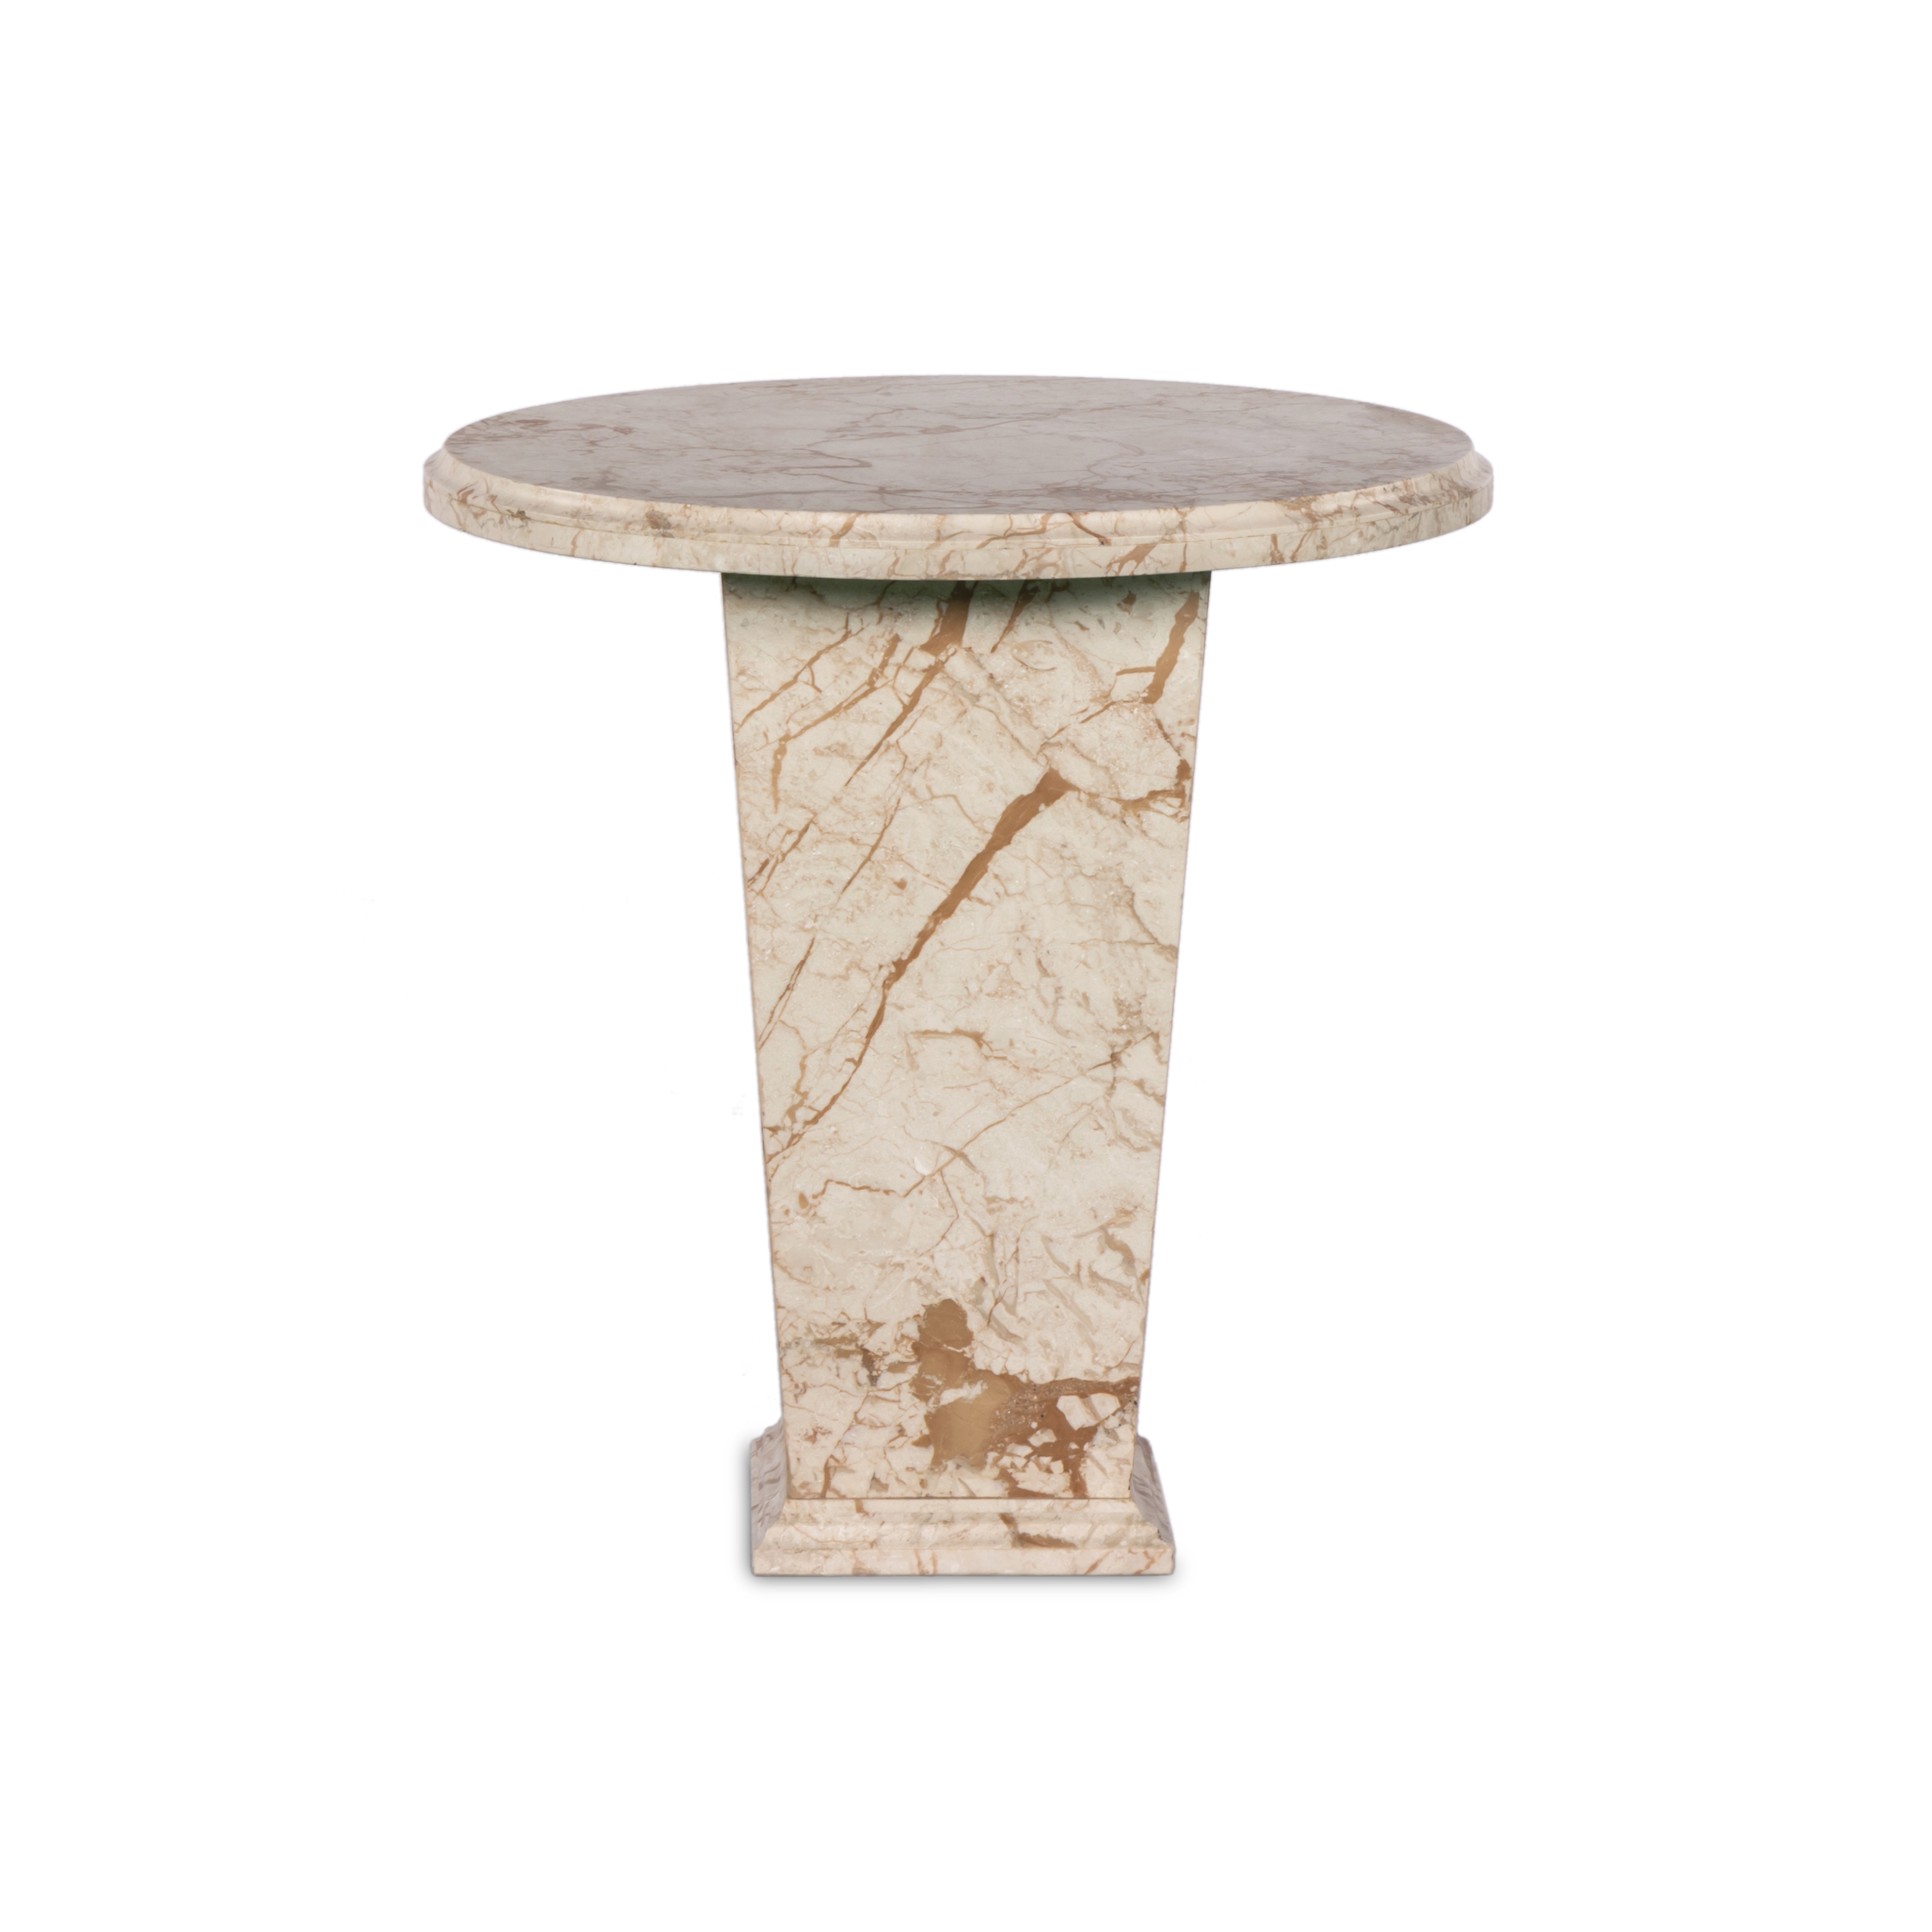 Eslo End Table-Desert Taupe Marble - Image 3